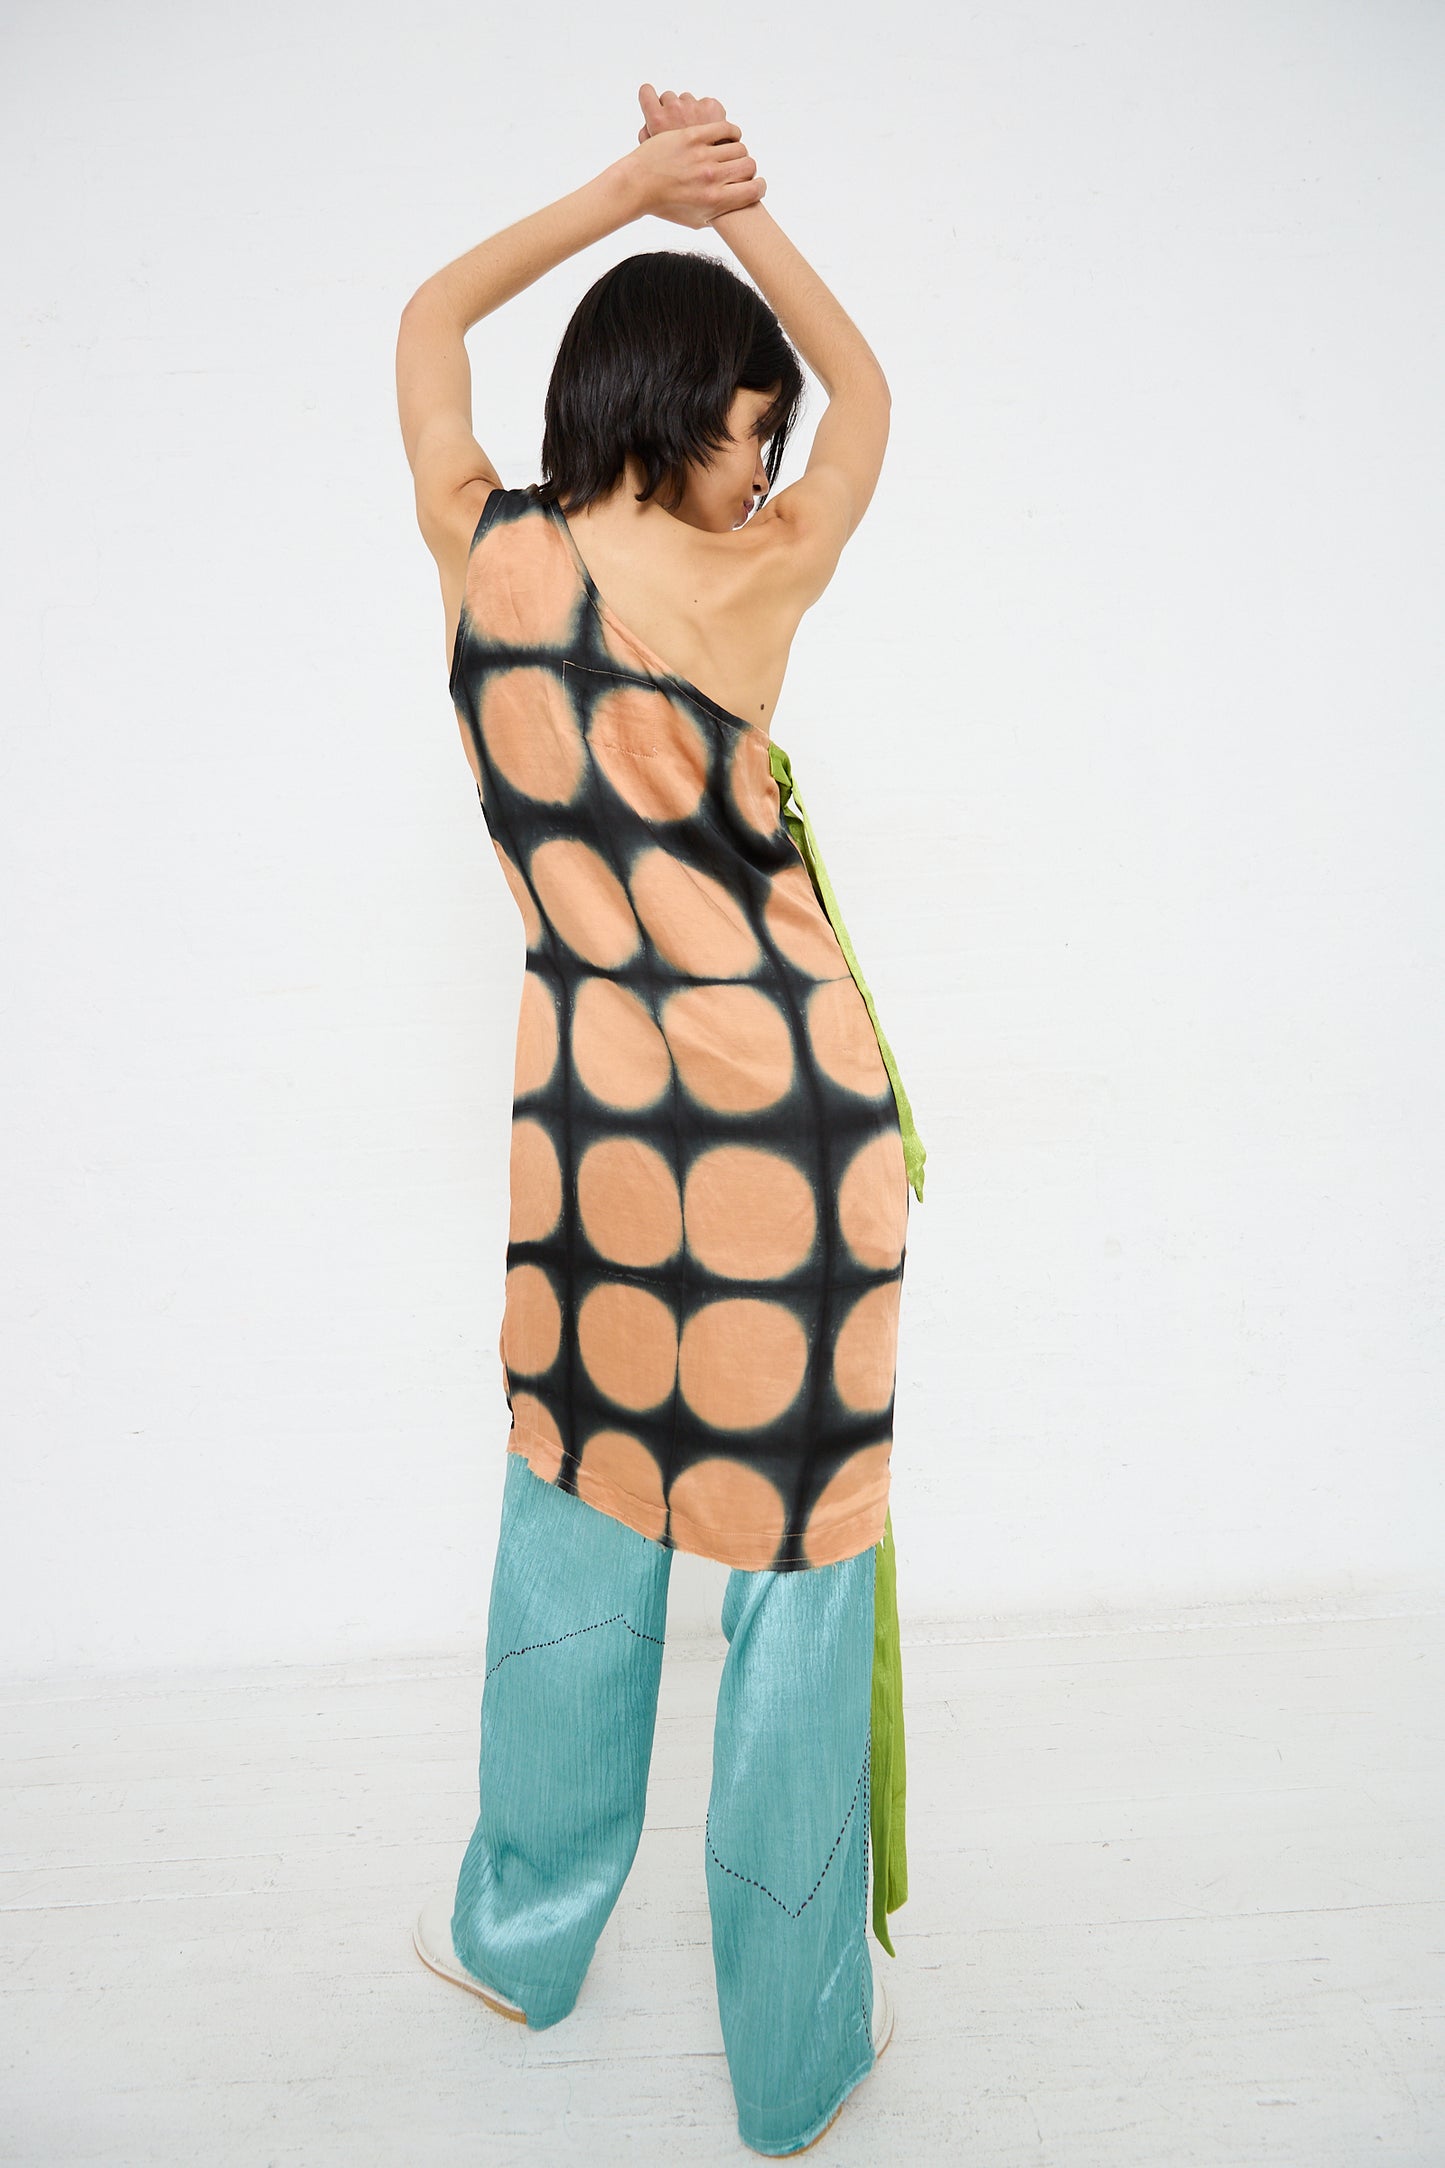 A person stands with their back to the camera, arms raised, wearing a sleeveless One Shoulder Mini Dot Dress by TIGRA TIGRA and blue pants. The background is a plain white wall and floor.